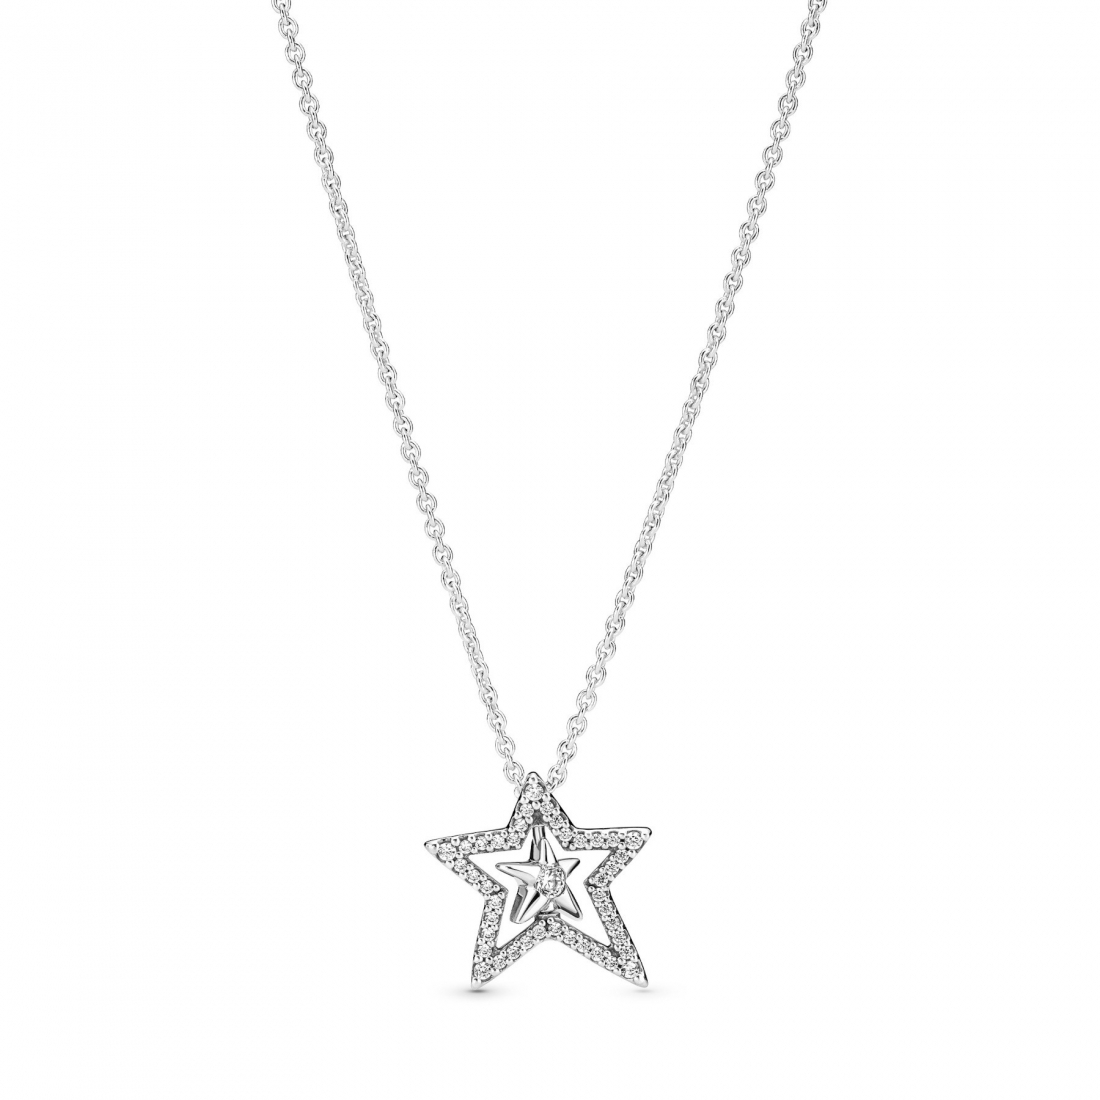 Women's 'Spinning Star' Necklace